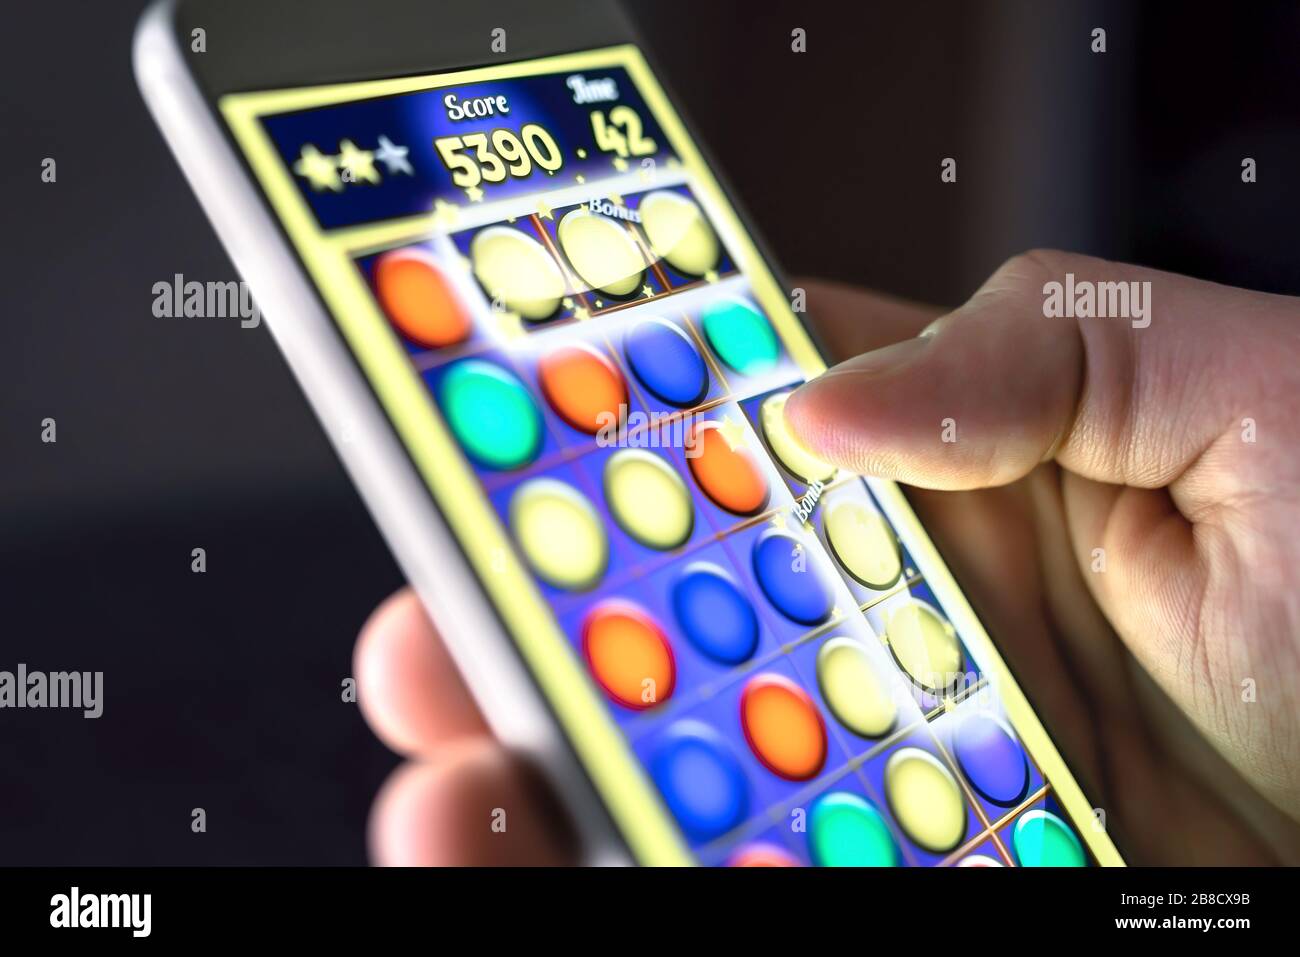 Mobile game in smartphone screen. Young man playing puzzle game in phone app. Gamer having fun. Digital gaming, entertainment and videogame concept. Stock Photo